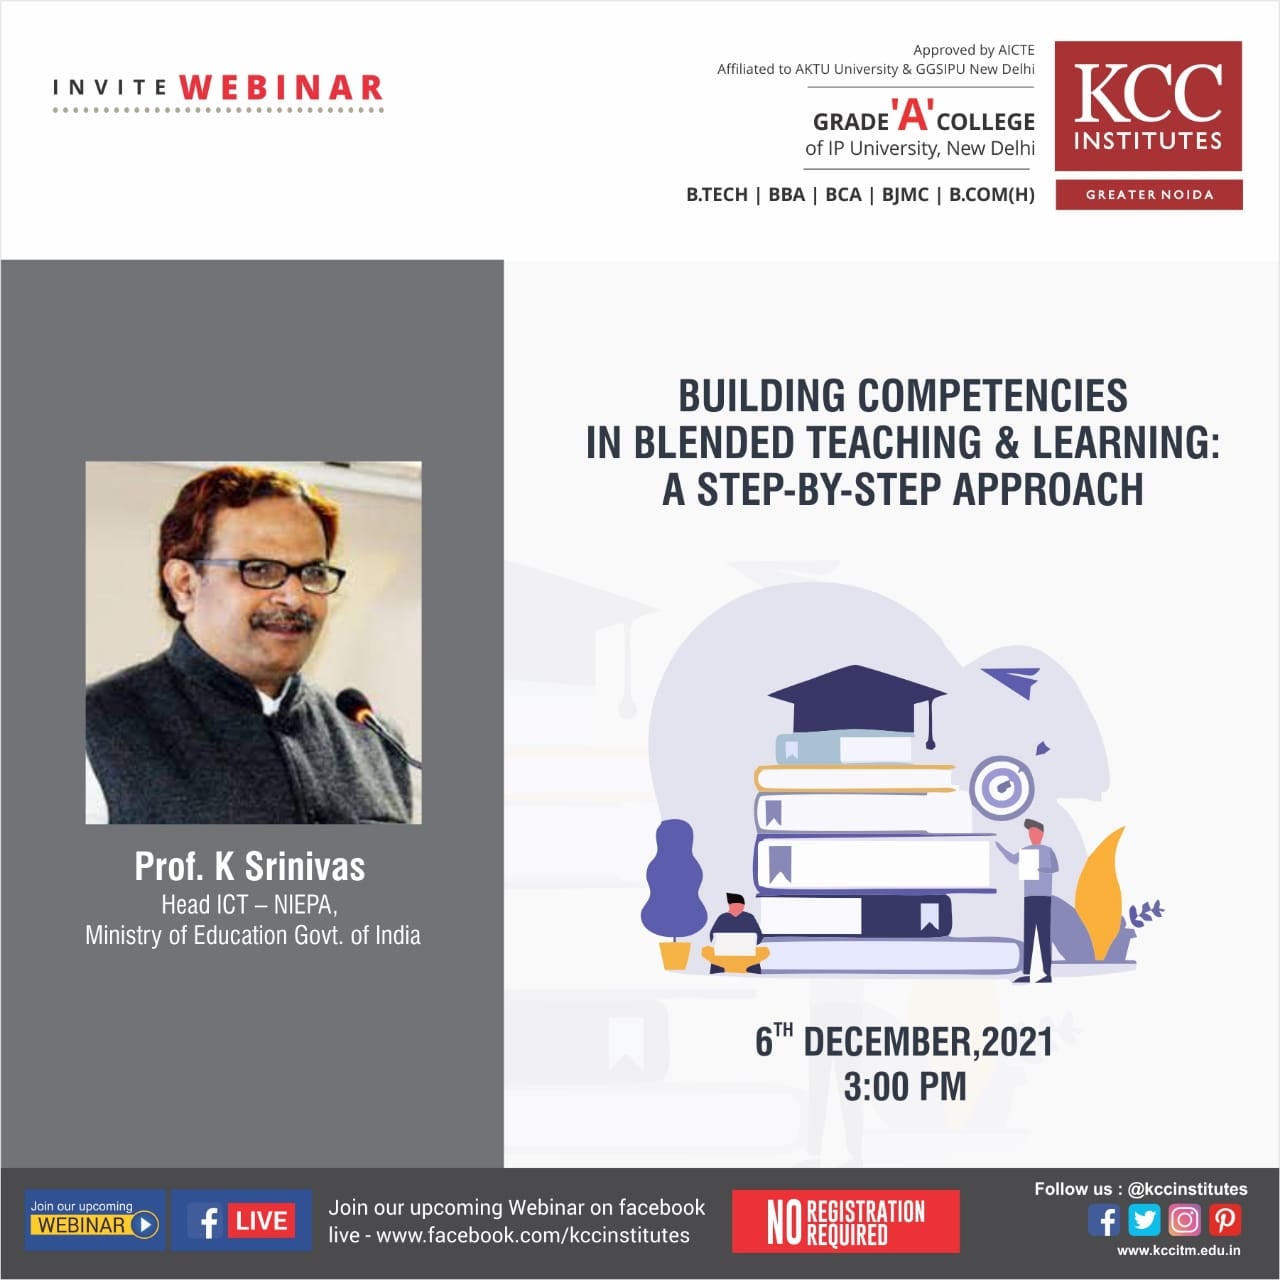 Prof. K Srinivas, Head ICT - NIEPA, Ministry of Education Govt. of India for the Webinar on 'BUILDING COMPETENCIES IN BLENDED TEACHING & LEARNING: A STEP-BY-STEP APPROACH' organized by KCC Institutes, Delhi-NCR, Greater Noida.